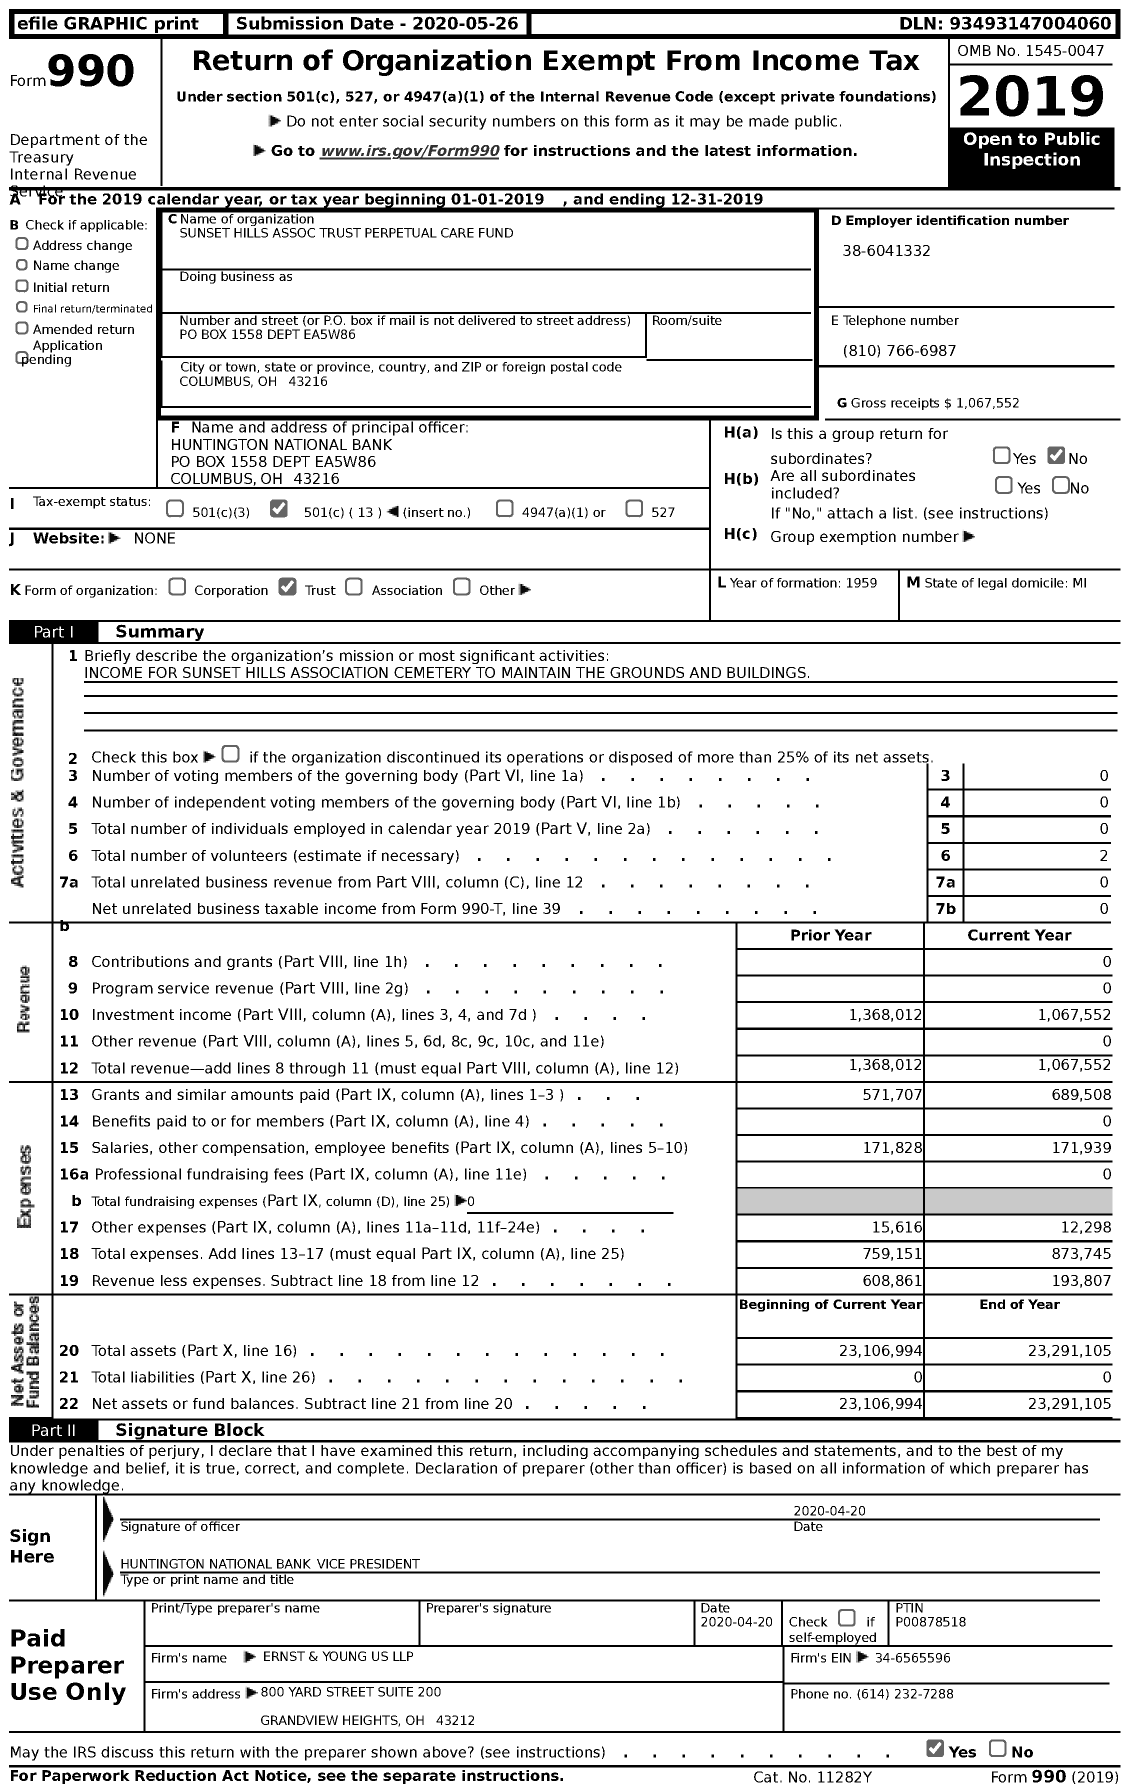 Image of first page of 2019 Form 990 for Sunset Hills Association Trust Perpetual Care Fund